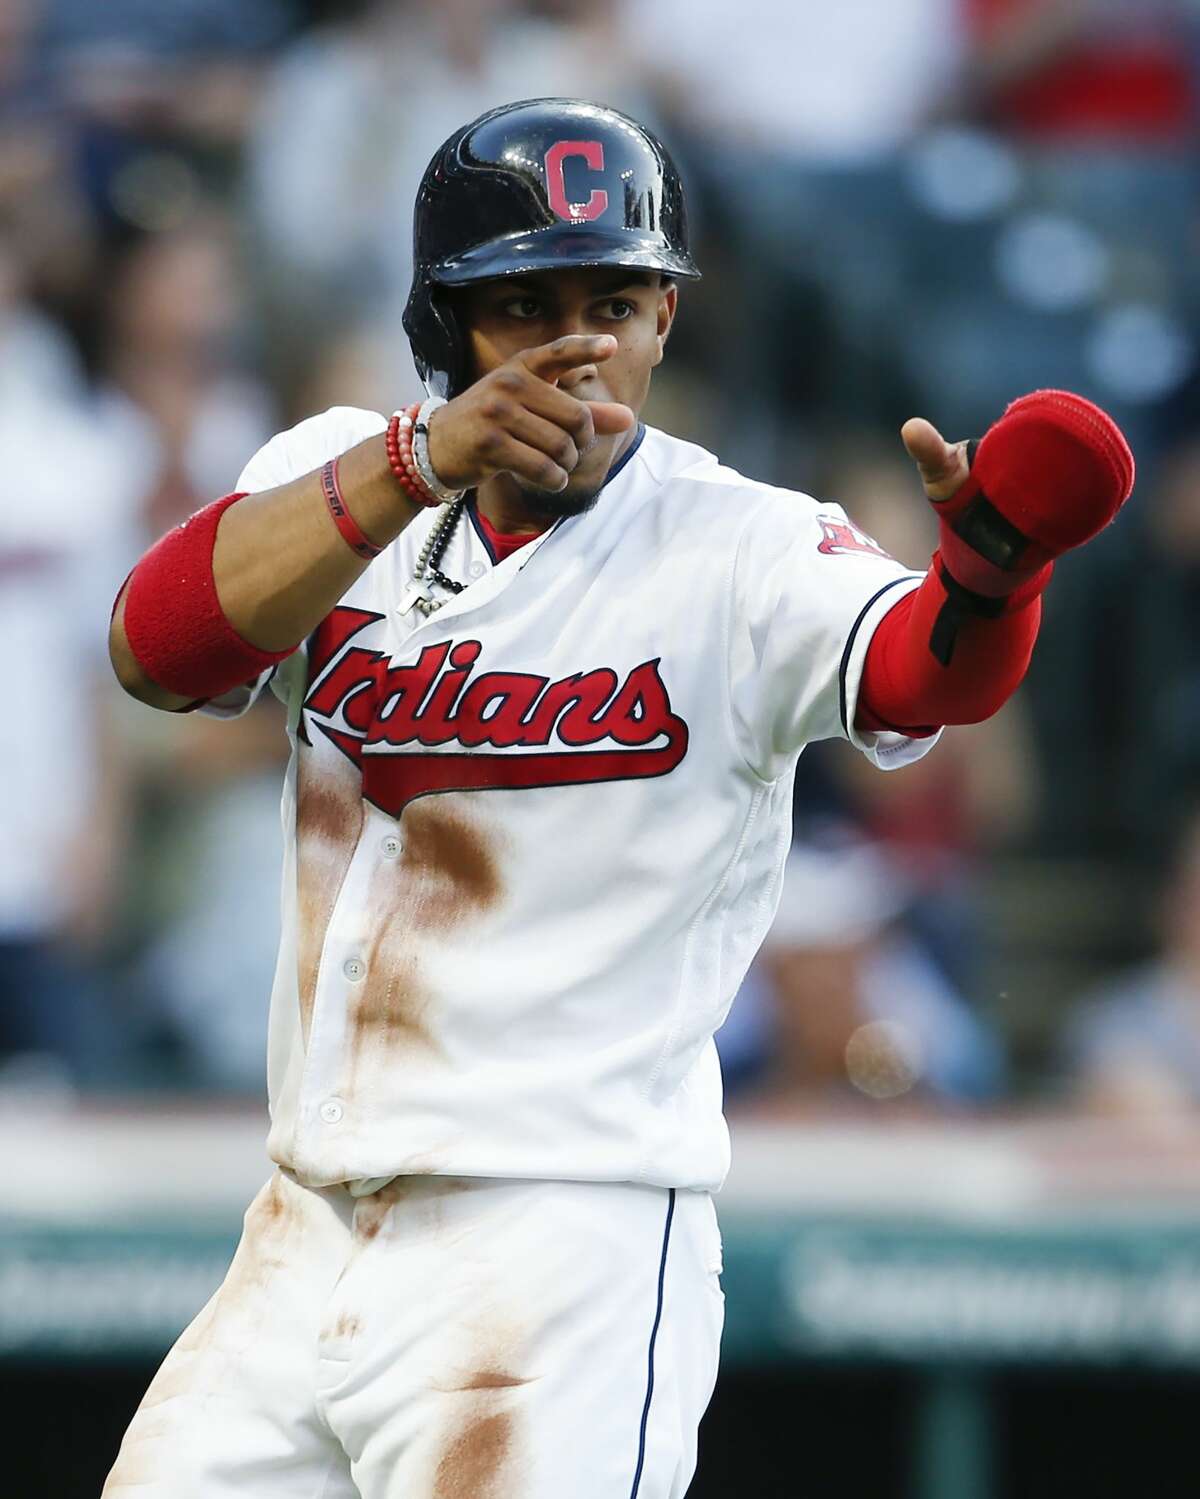 CLEVELAND, OH - APRIL 26: Francisco Lindor #12 of the Cleveland Indians points to Michael Brantley at first base after scoring on Brantley's two-run single off of pitcher Lance McCullers Jr. of the Houston Astros during the fifth inning at Progressive Field on April 26, 2017 in Cleveland, Ohio. The Indians defeated the Astros 7-6. (Photo by Ron Schwane/Getty Images)